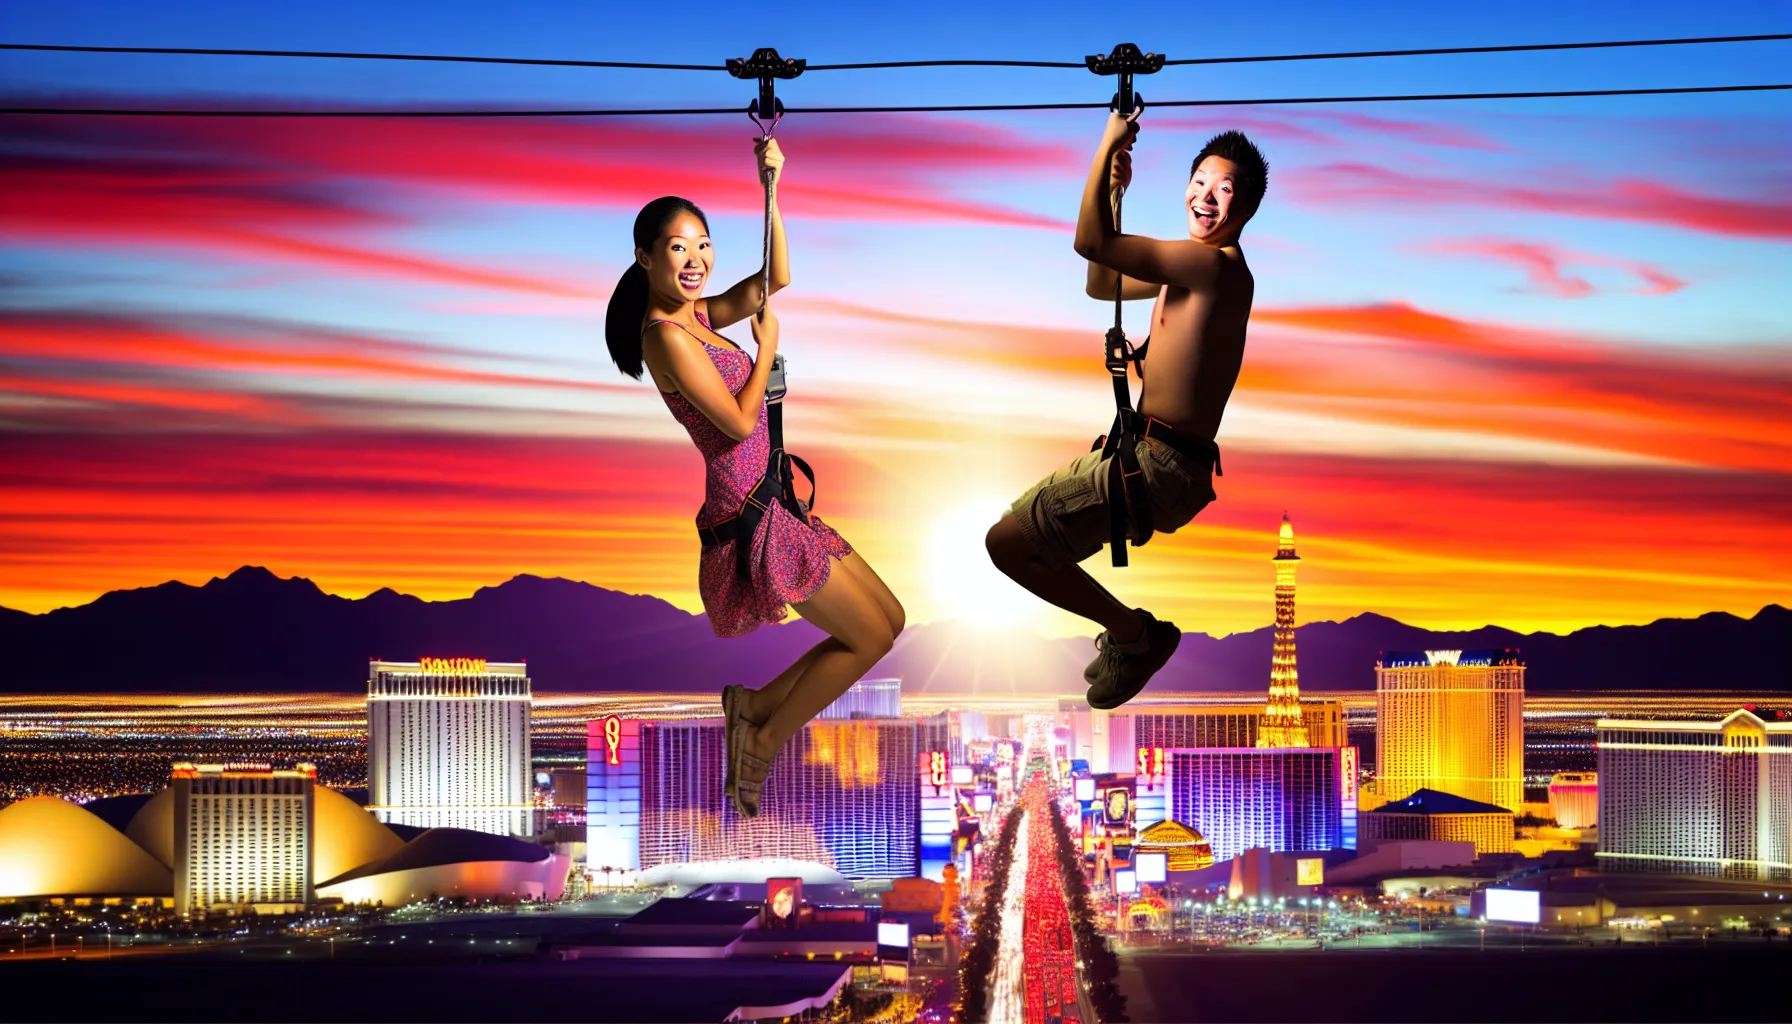 <strong>Shared Thrills Above the Neon Glow</strong>: As the sun dips below the horizon, a couple's laughter echoes through the sky, encapsulating the essence of Las Vegas—a city where love and adventure intertwine amidst the radiance of endless possibilities.